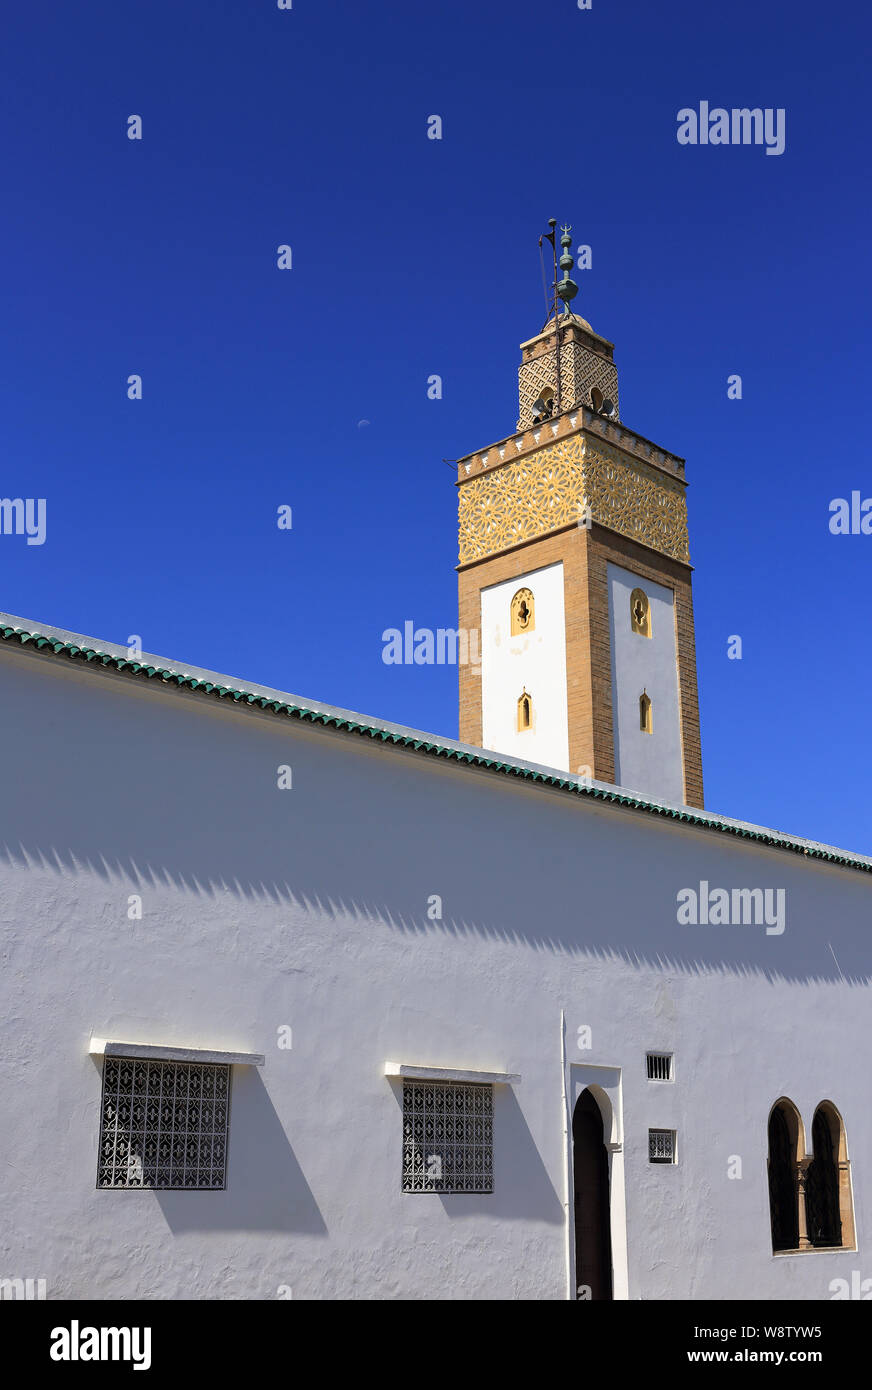 Rabat, Morocco. The 18th Century, Ahl Fas Mosque minarete. Also known as the Royal Palace Mosque. Blue sky, space for text. Stock Photo